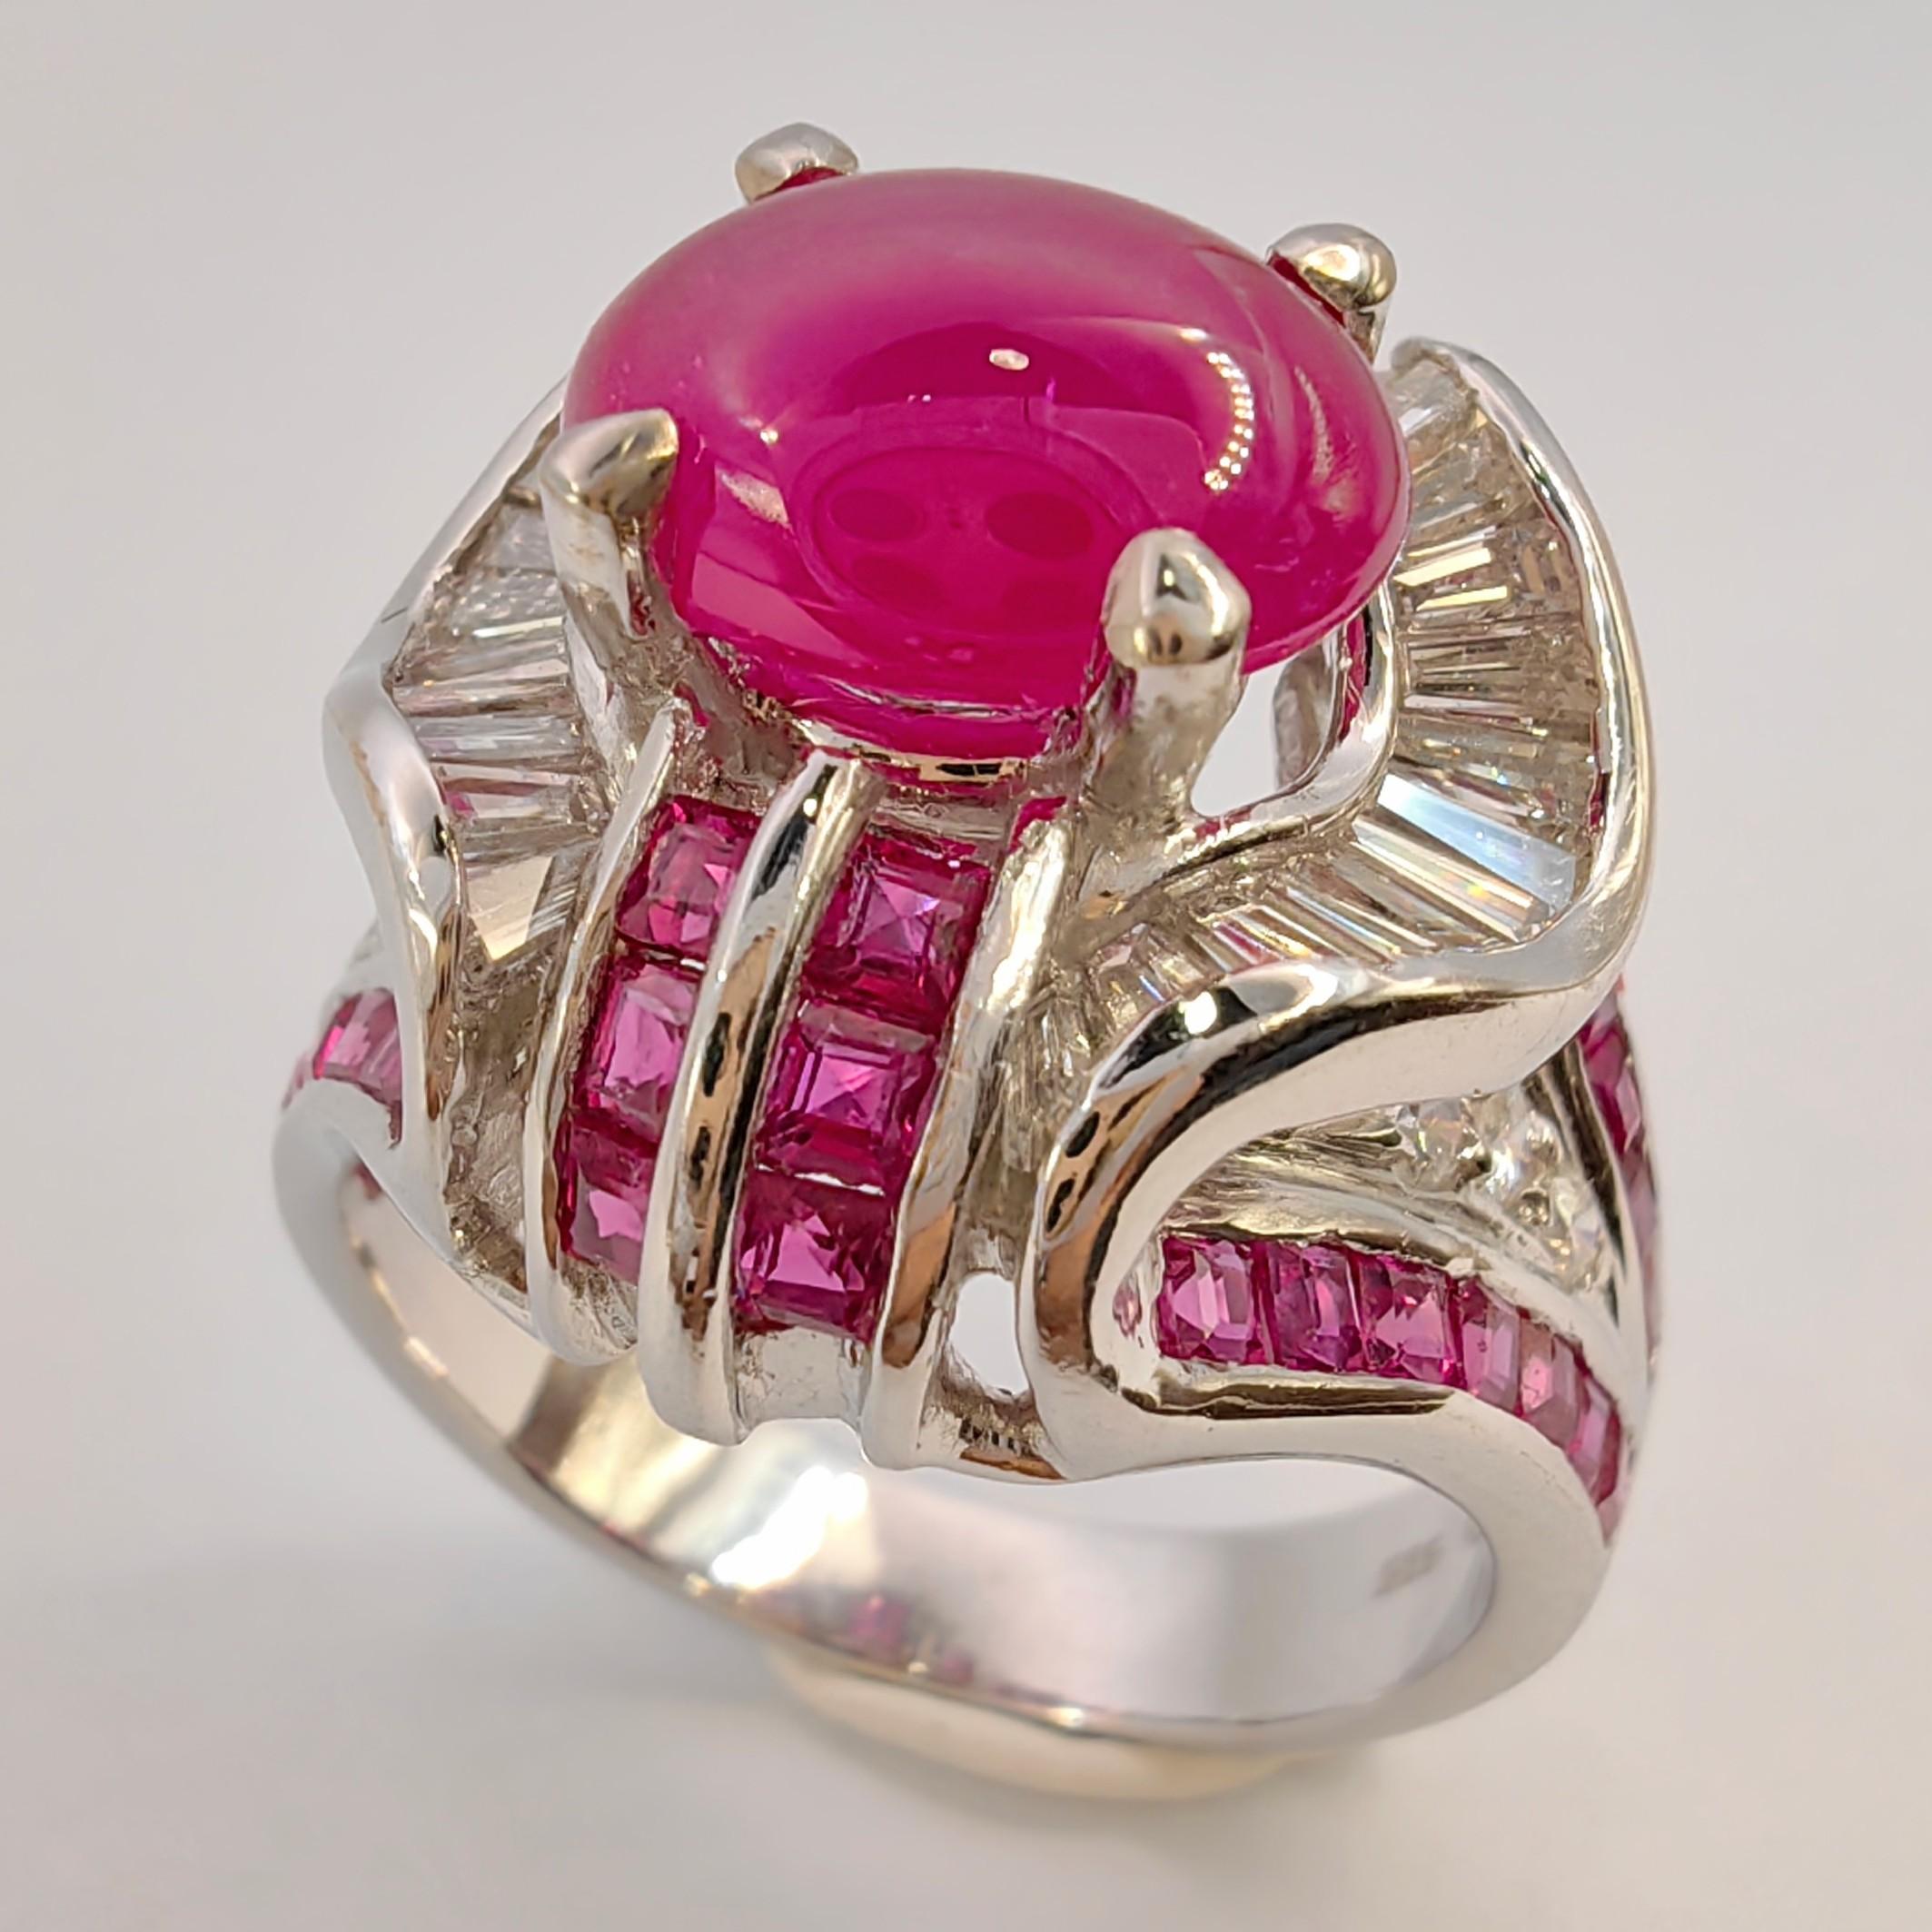 Introducing our exquisite Art Deco 2.91 Carat Cabochon Ruby Diamond Ring in 14K White Gold, a true masterpiece that effortlessly blends vintage charm with modern elegance.

At the heart of this captivating ring lies a magnificent oval cabochon ruby,